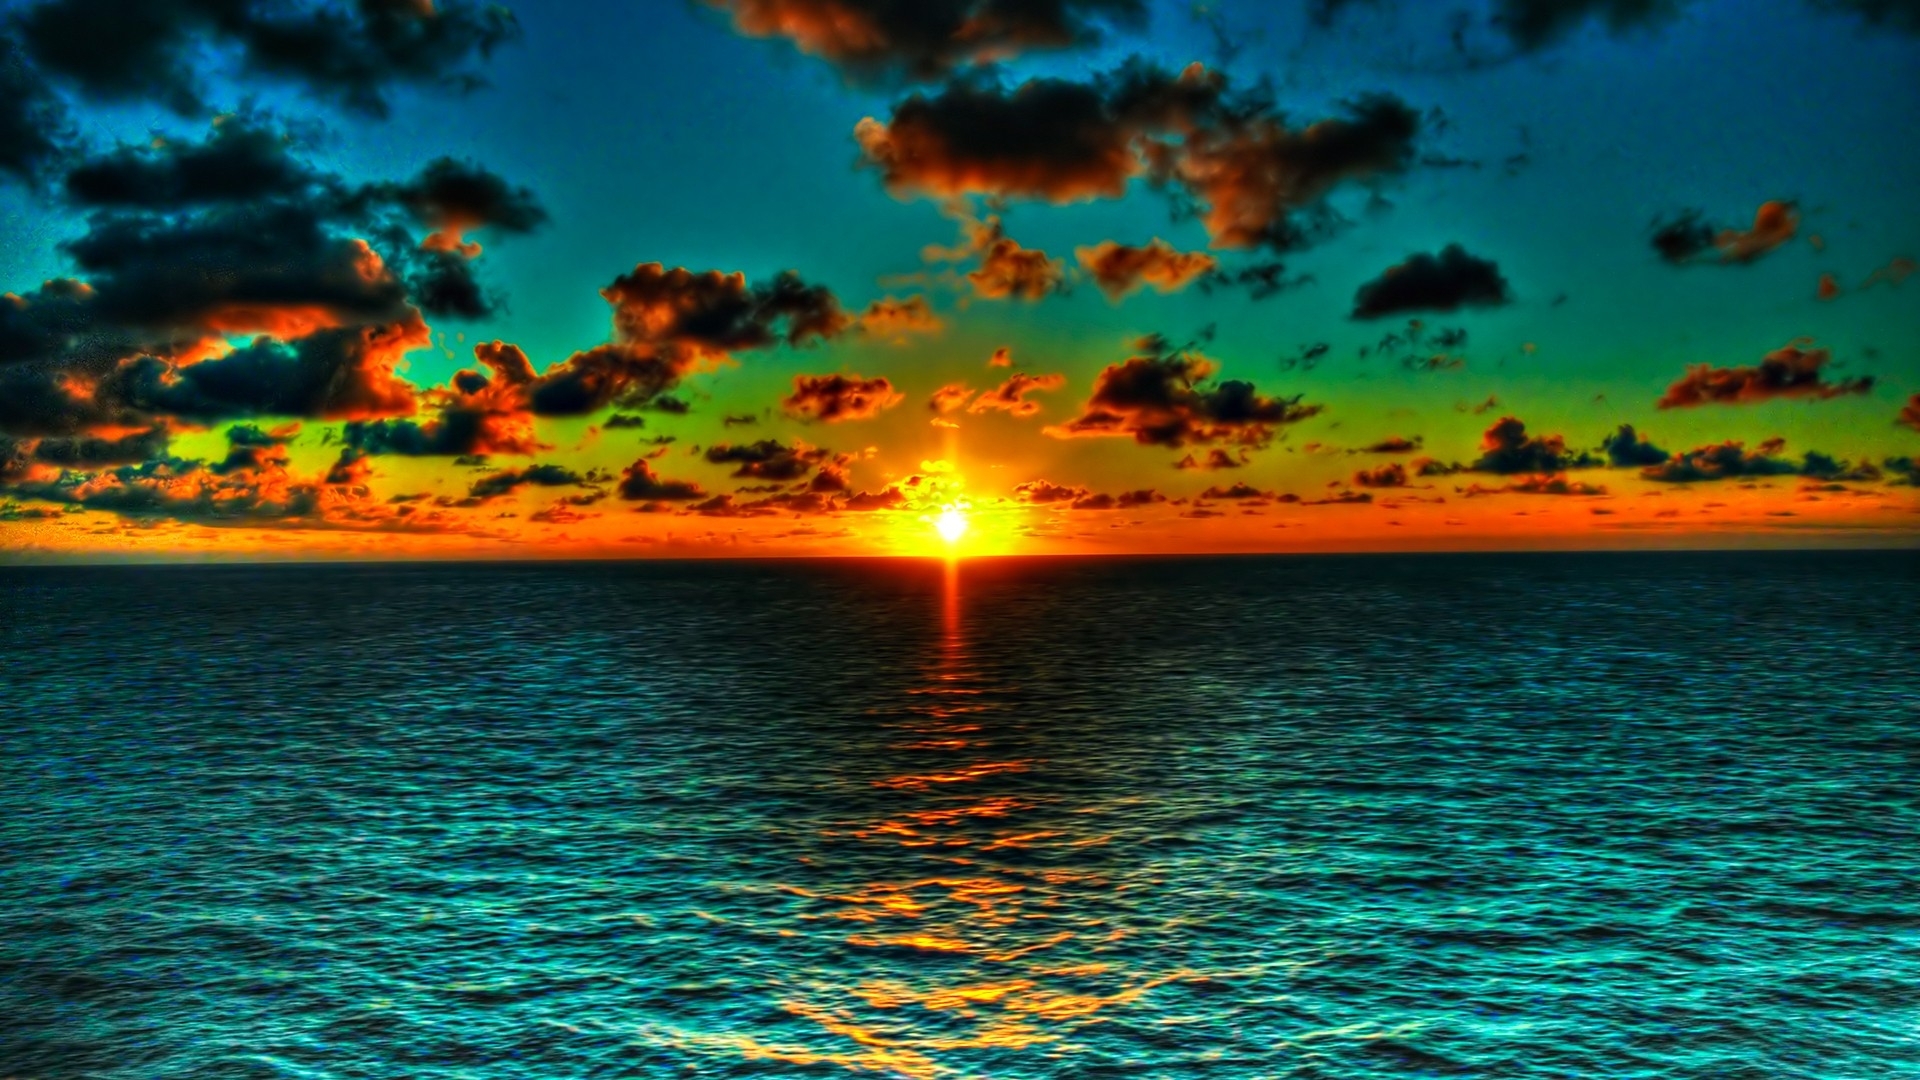 Beautiful Sunset Live Wallpaper:Amazon.com:Appstore for Android